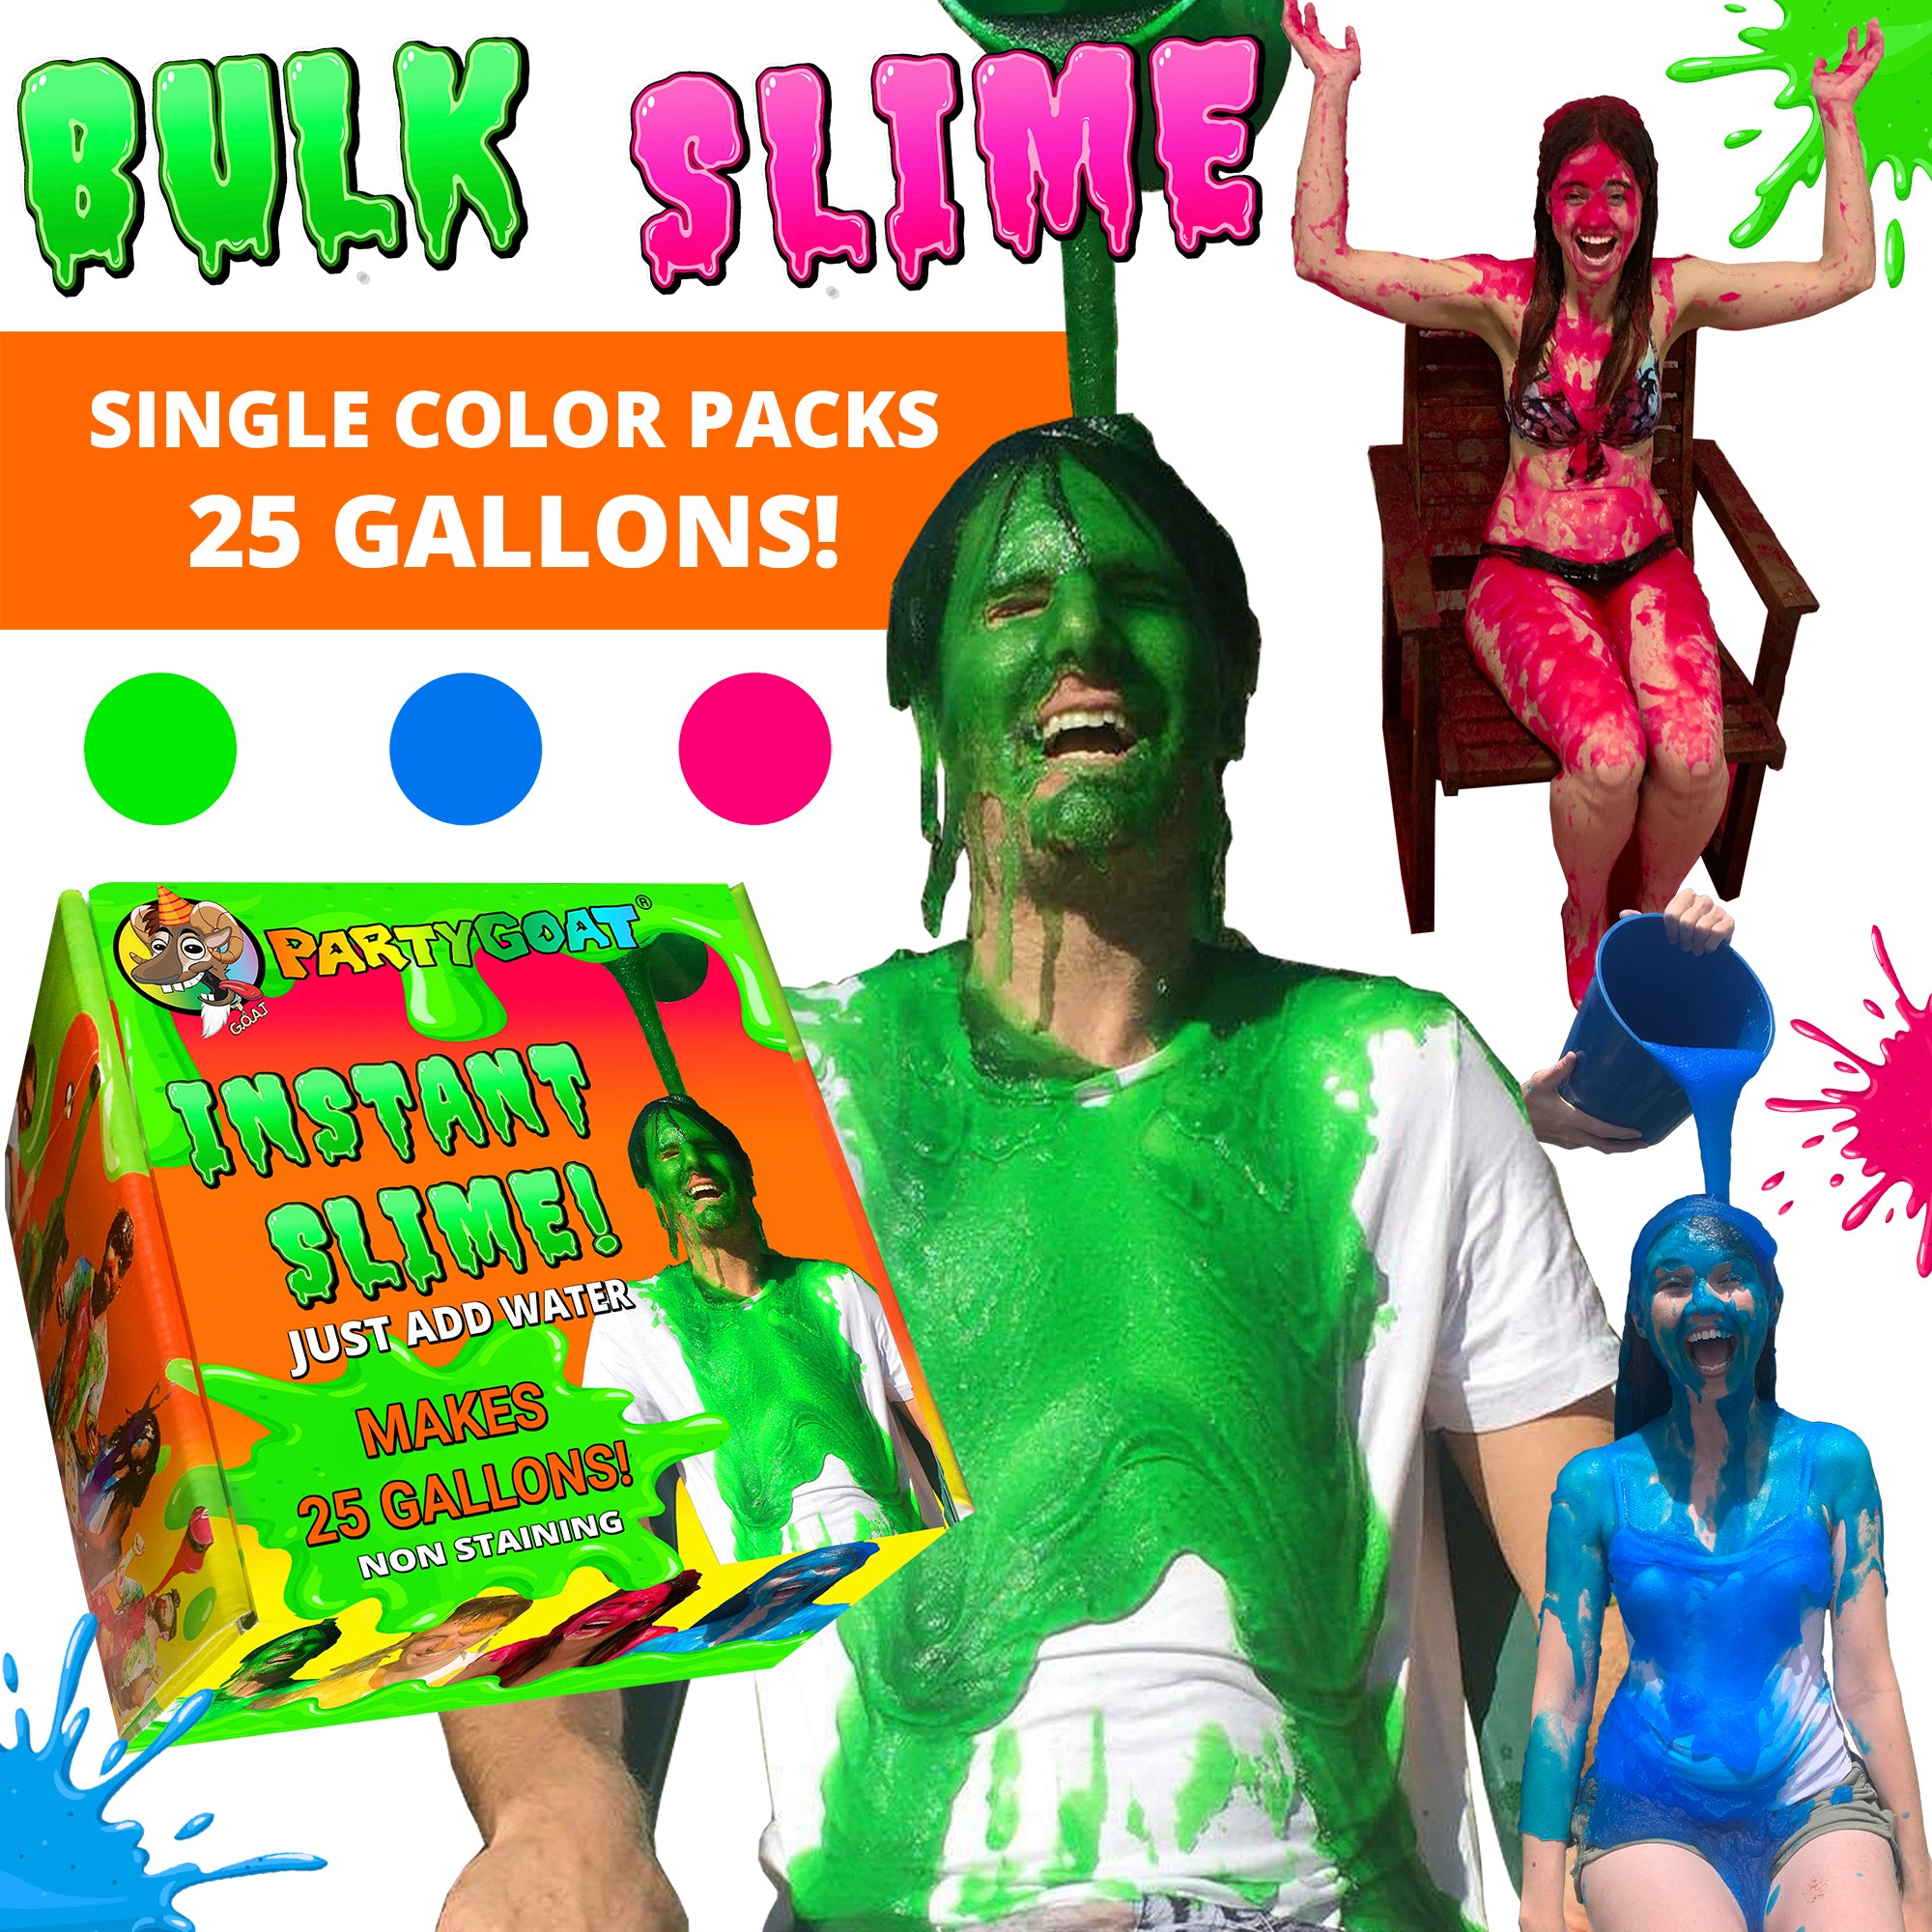  Bulk Instant Slime Powder! Mix with Water to Make a Huge 40  Gallons of Slime! 4 Colors for Slime Bucket Challenges, Color Run, Blaster  Gun, Bath Slime. Get Slimed in Blue